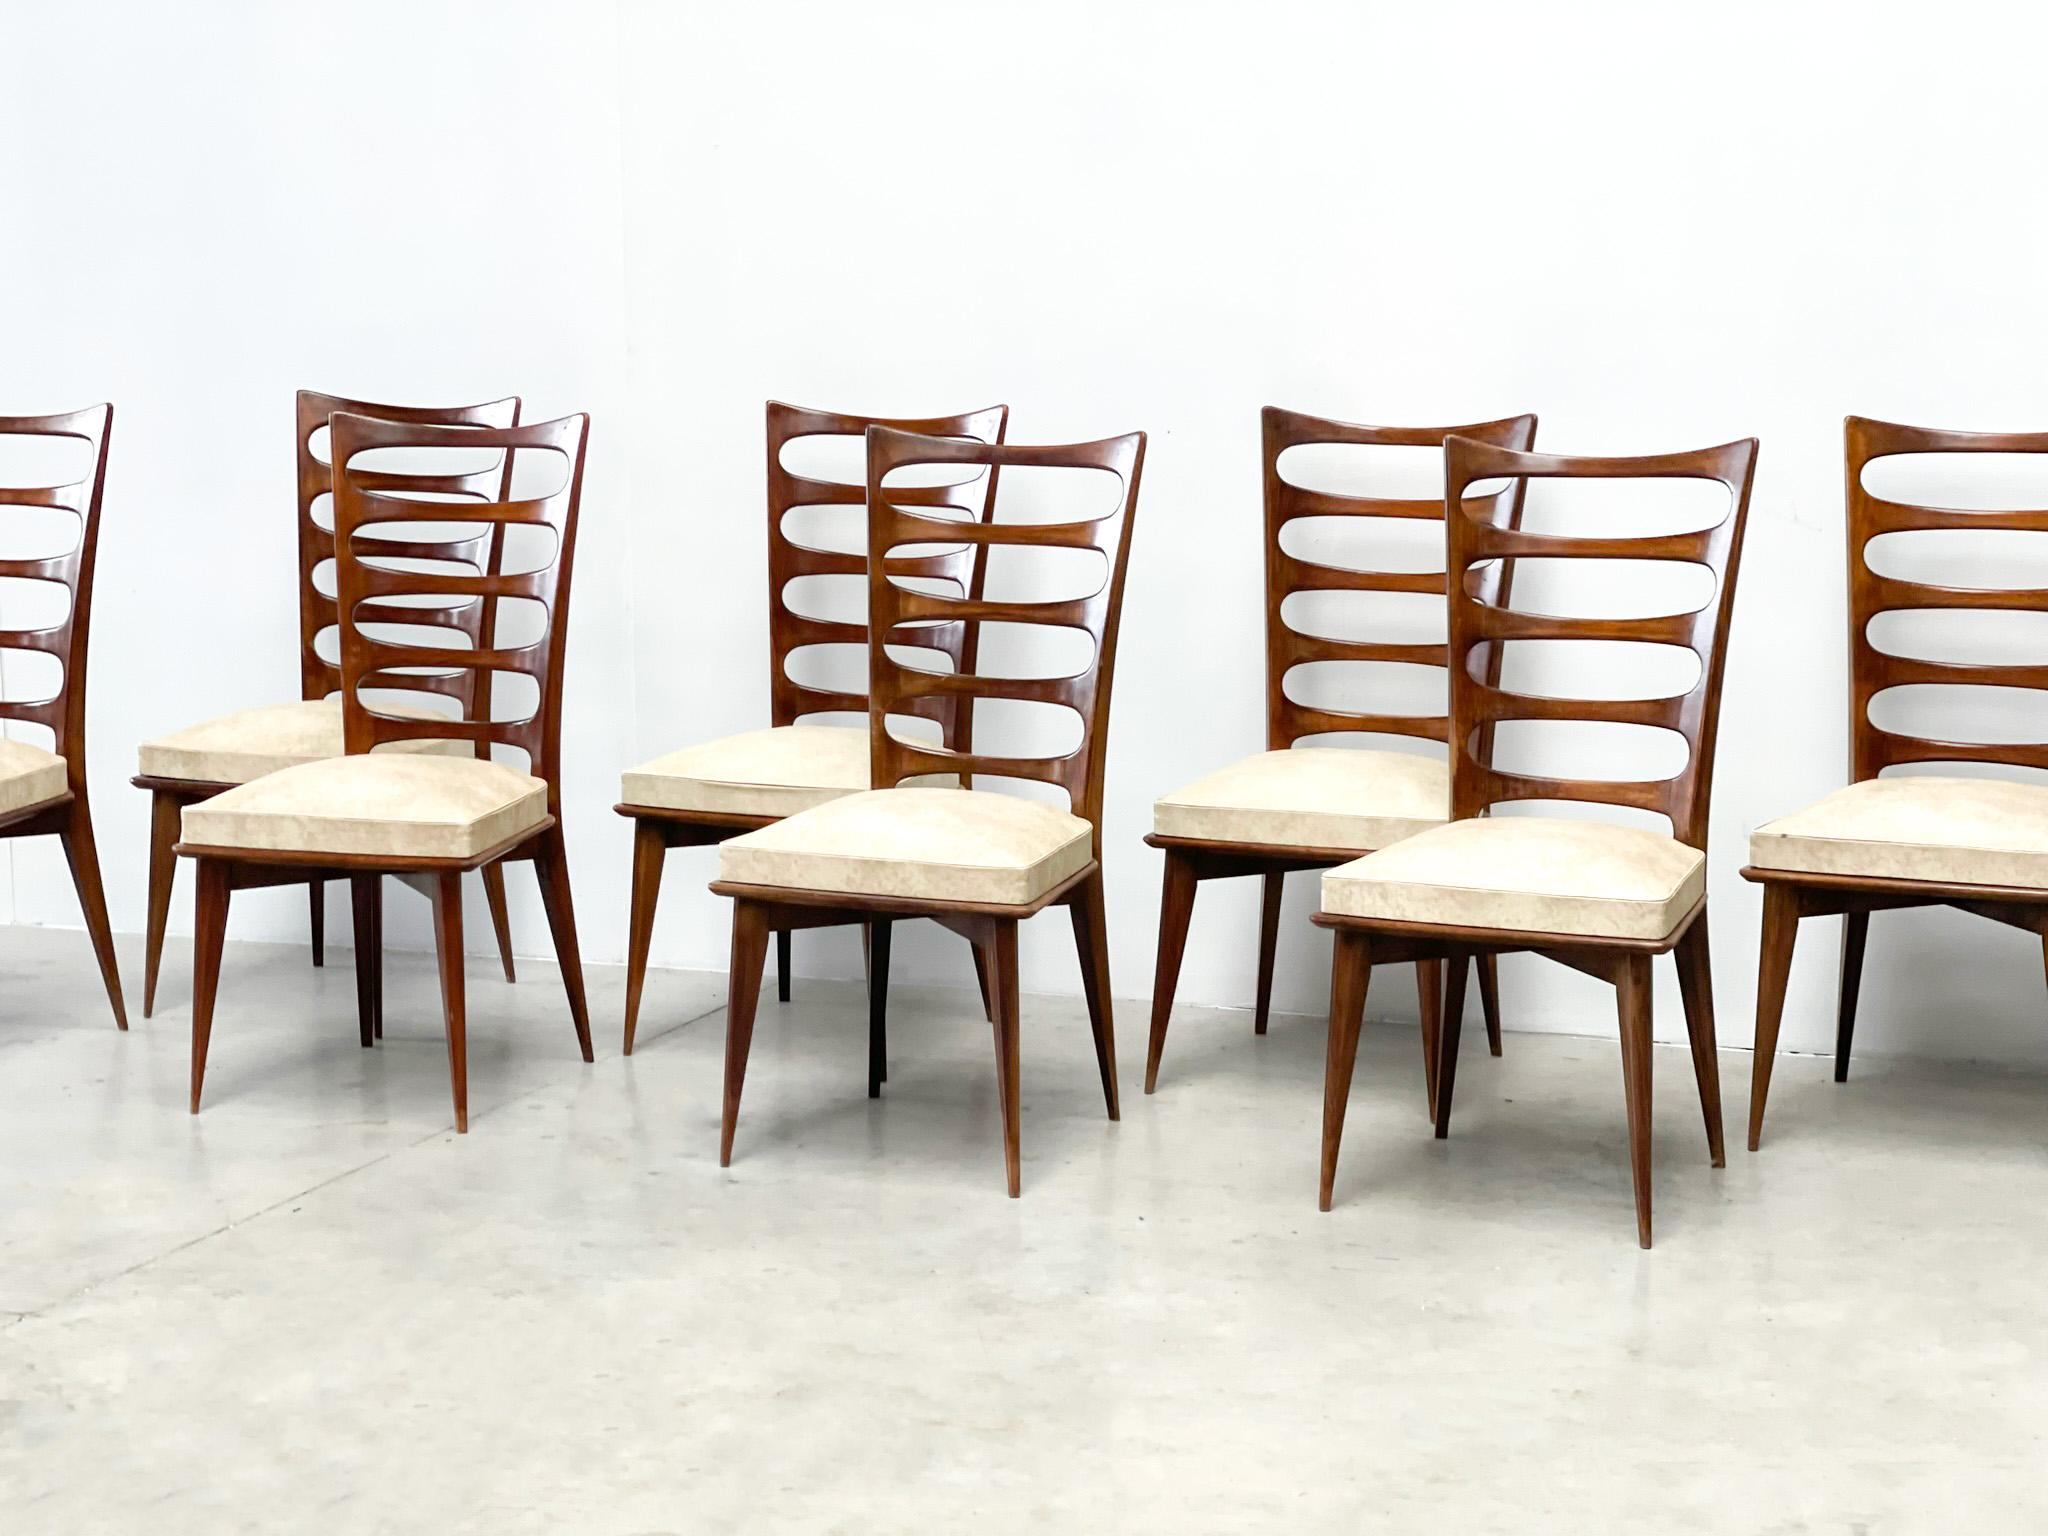 Very nice set of French dining chairs. The chairs are designed by famous French designer Poisson. The chairs were manufactured in the 1970s. They have a very stylish frame where clearly Italian influences can be found.